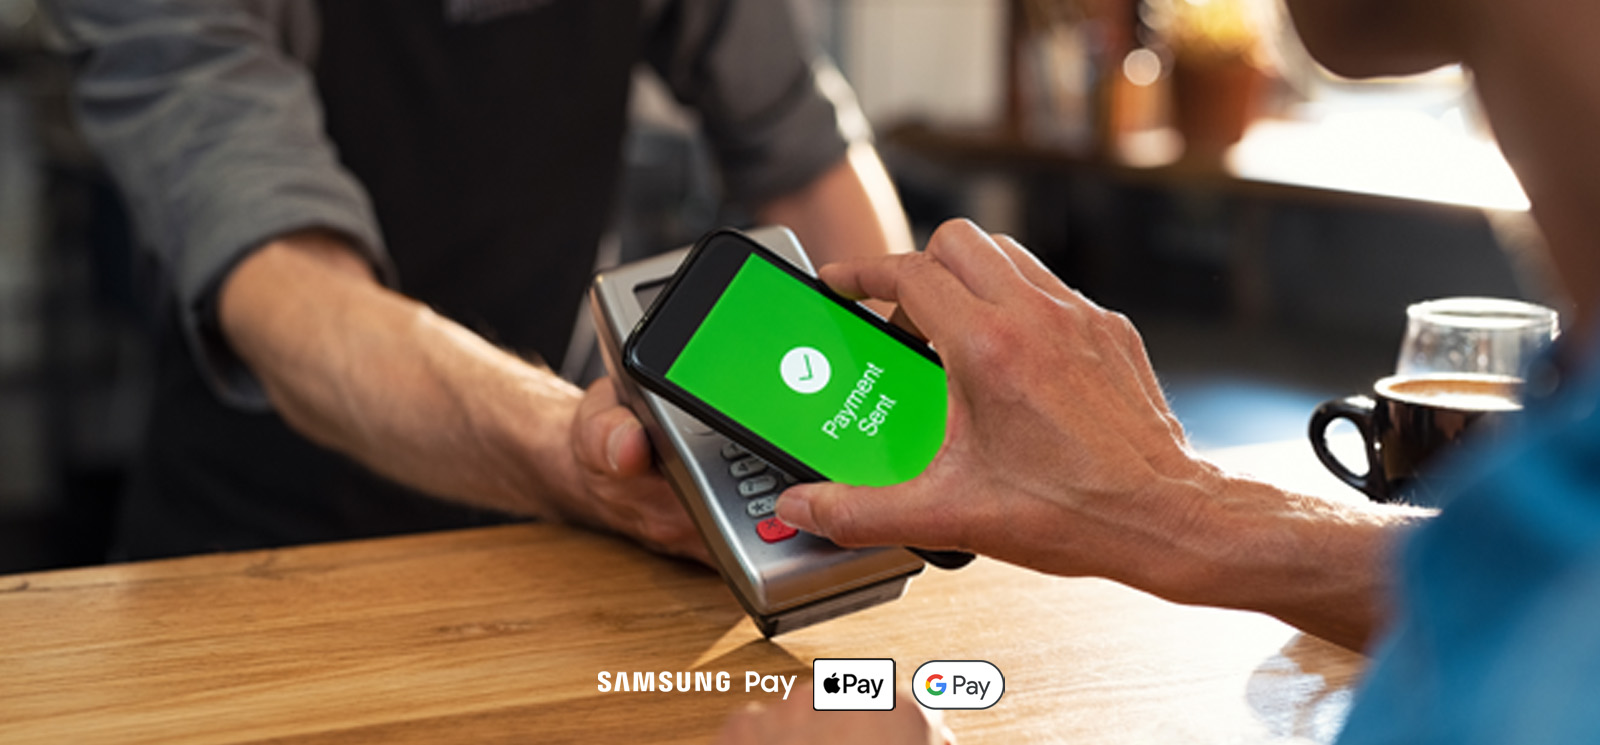 Image of mobile payment with digital wallet.